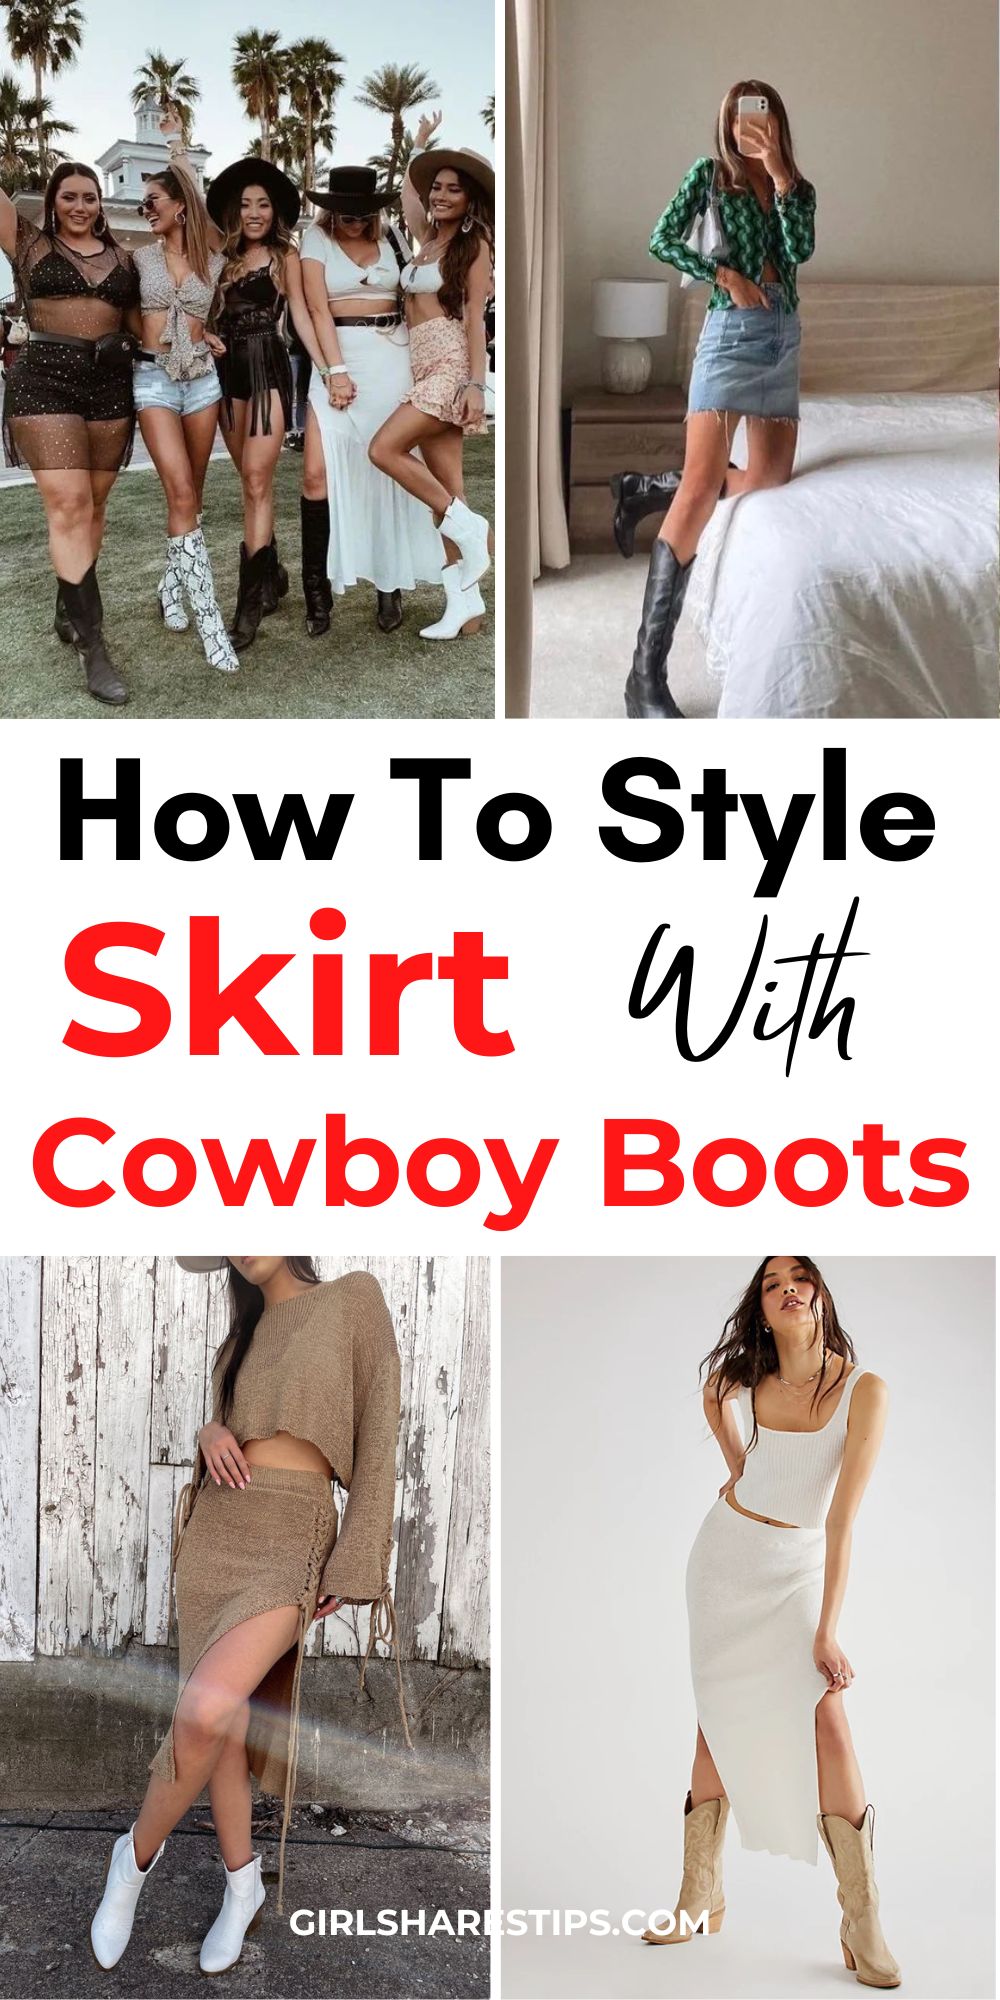 skirt and cowboy boots outfit ideas collage